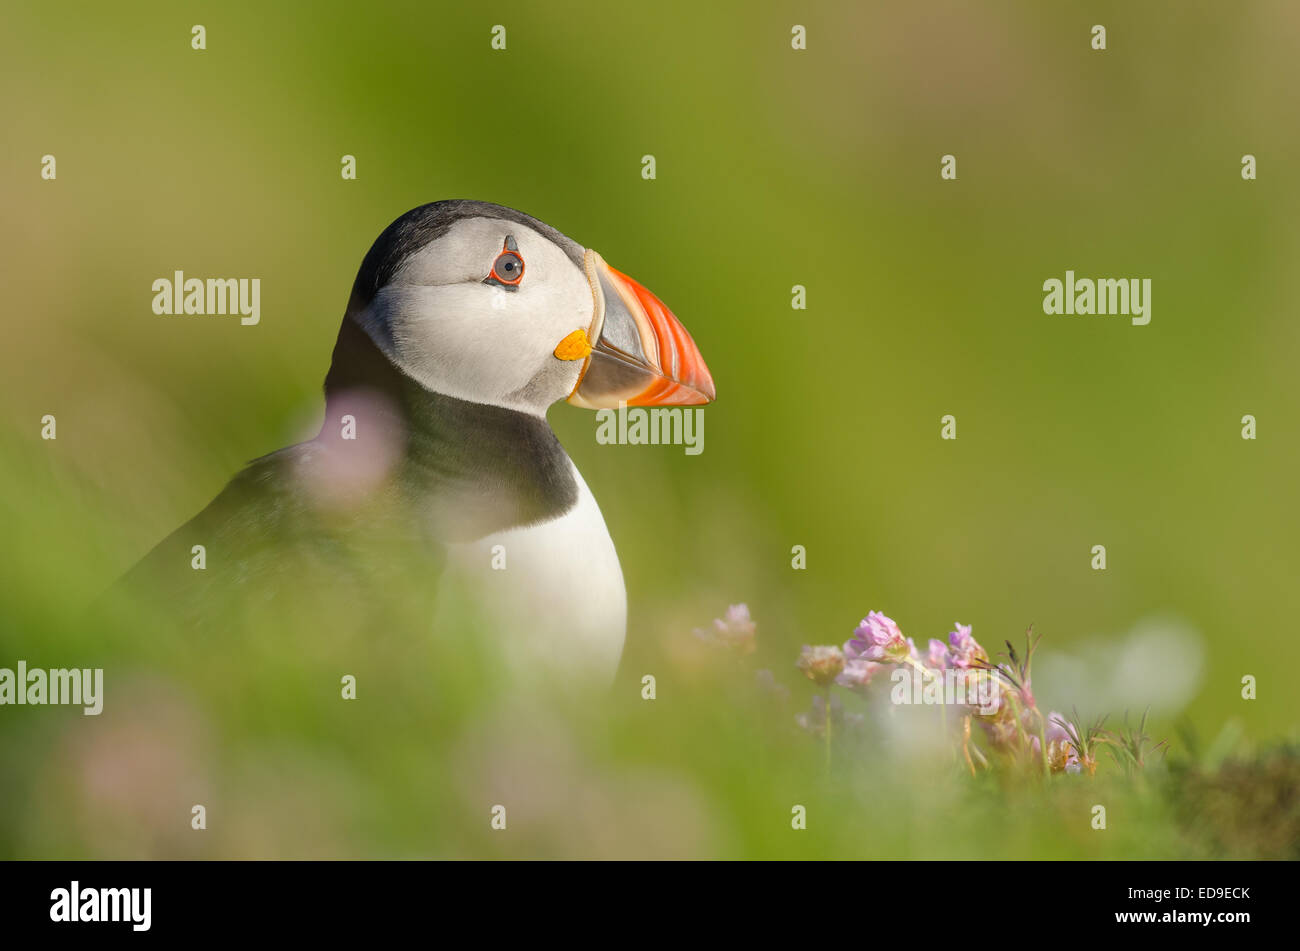 Atlantic Puffin (Fratercula arctica) from Sumburgh Head in Shetland with a lush green background. Stock Photo